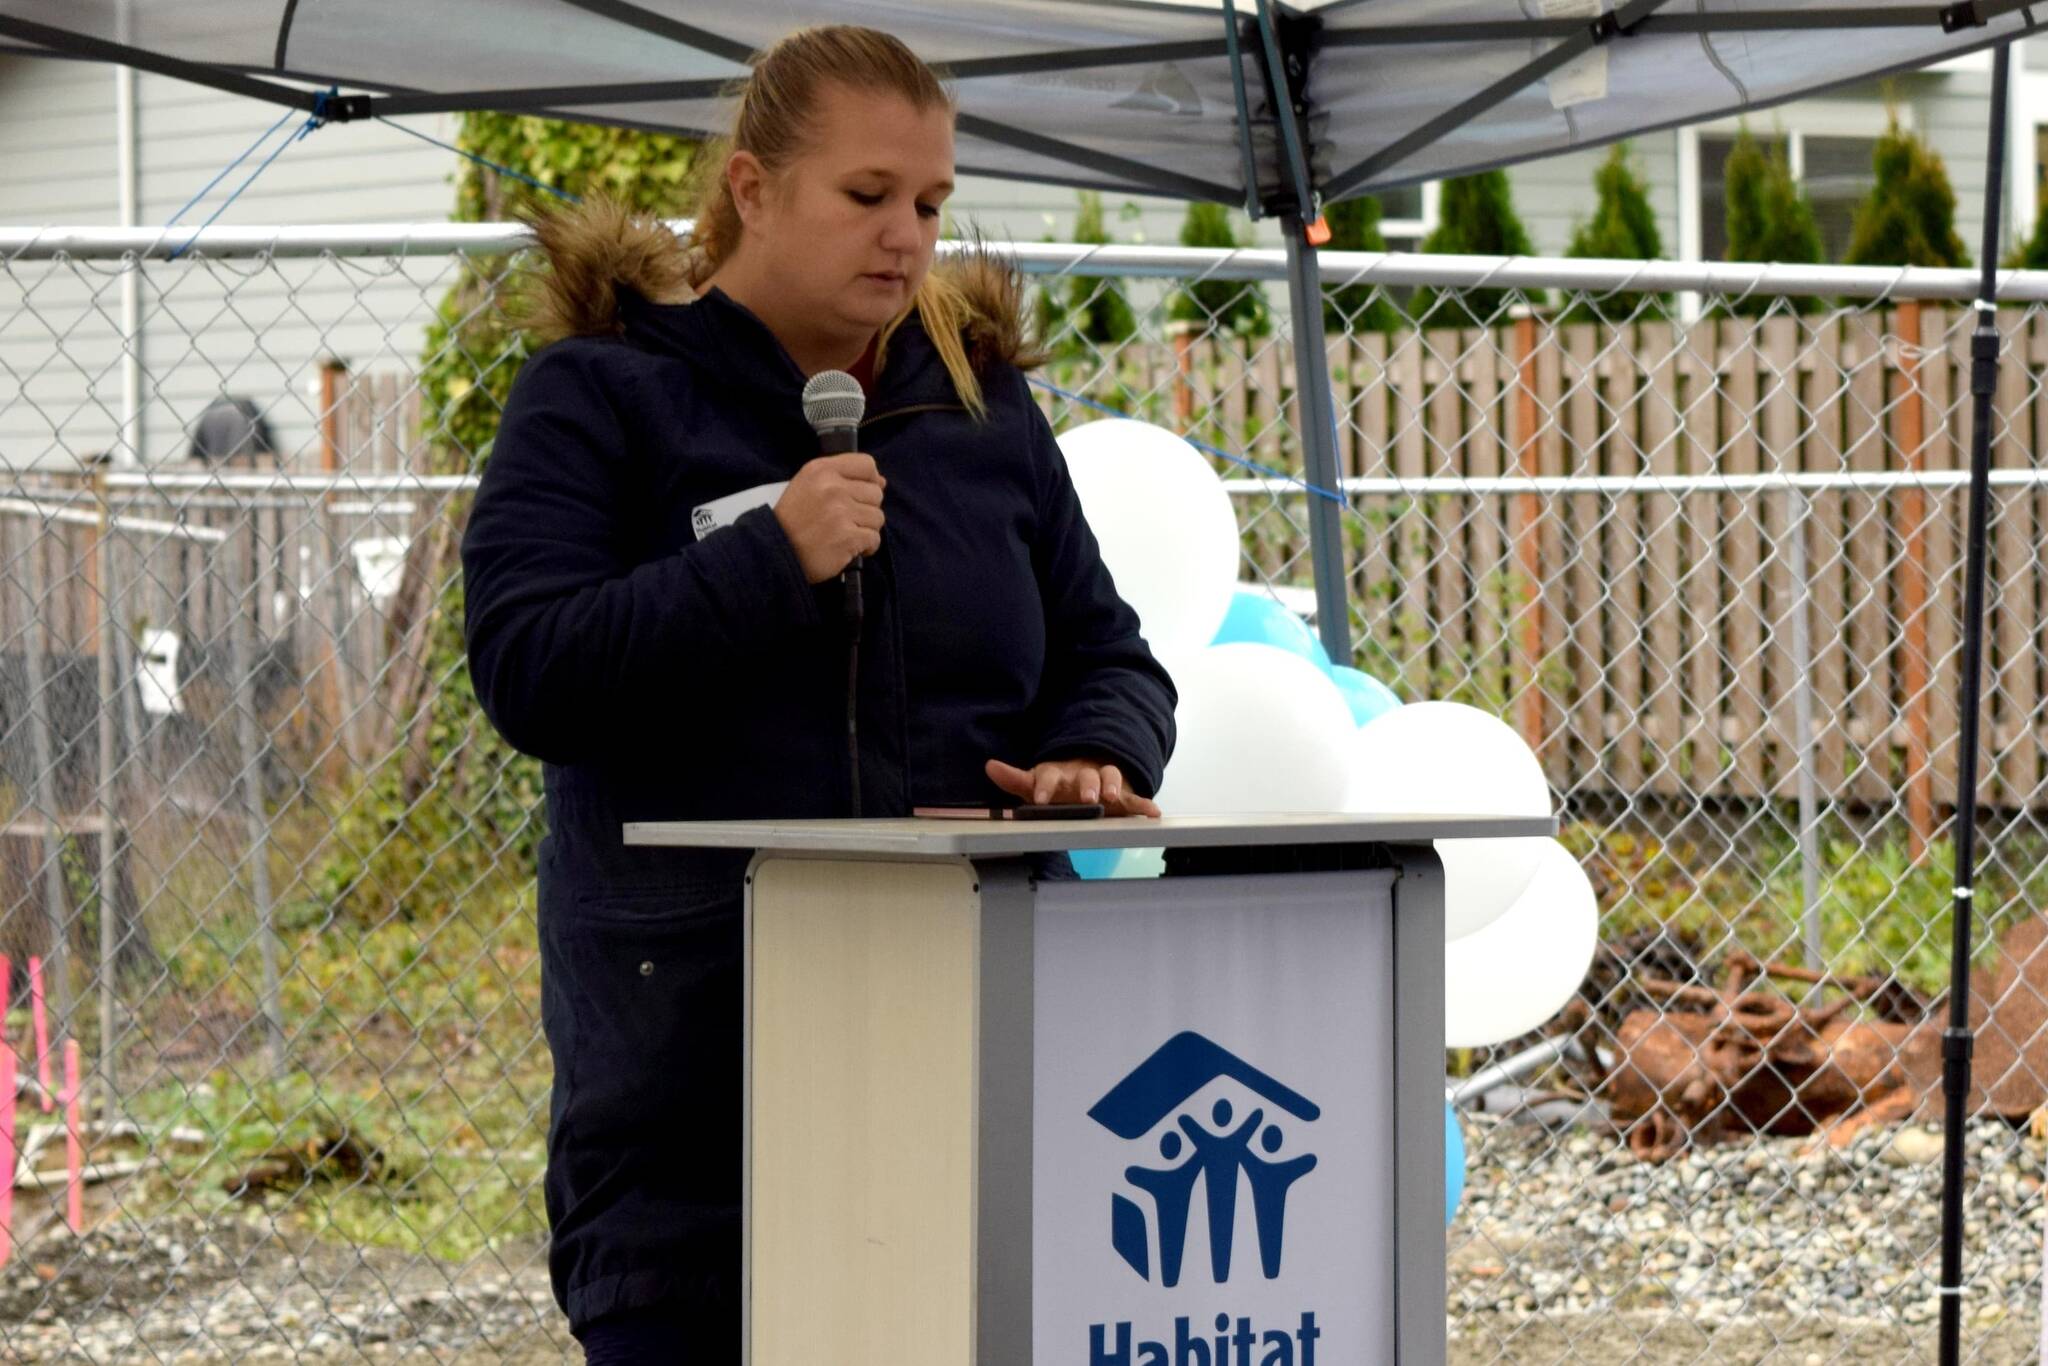 Nicole Evans-Stanley, a Habitat for Humanity homeowner, gives a speech at the Habitat groundbreaking Sept. 28 in North Bend. Photo by Conor Wilson/Valley Record